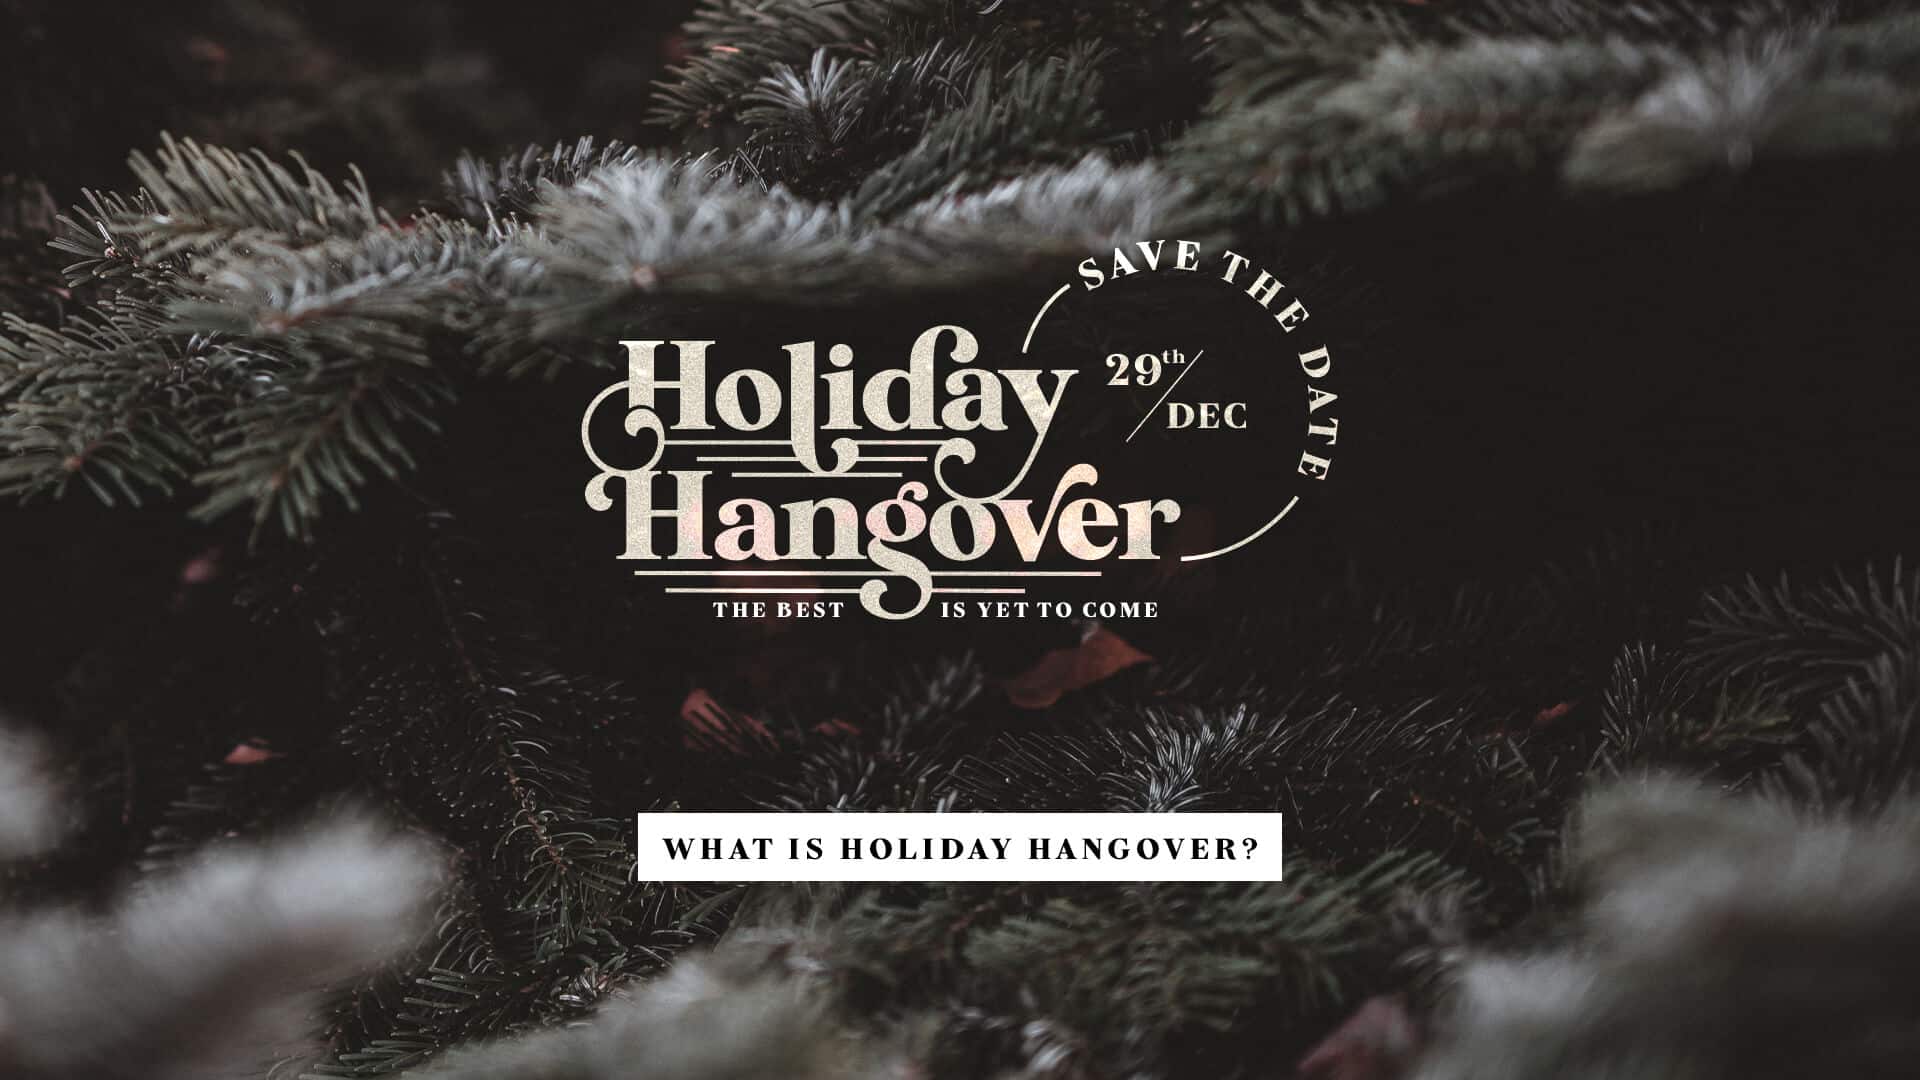 Holiday Hangover is December 29th. No church at physical locations.